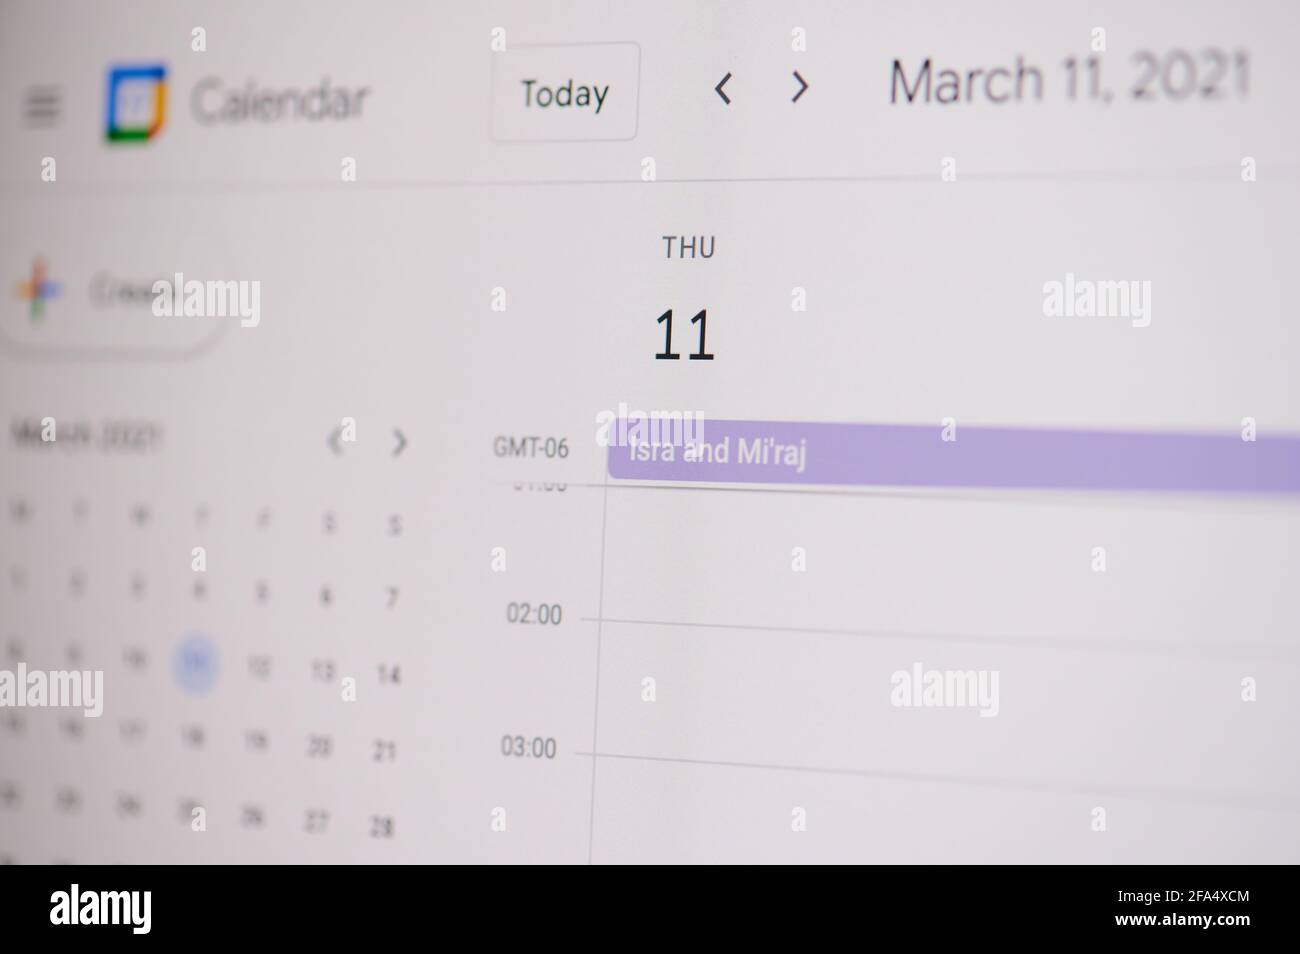 New york, USA - February 17, 2021: Isra and Miraj 11 of March on google calendar on laptop screen close up view. Stock Photo